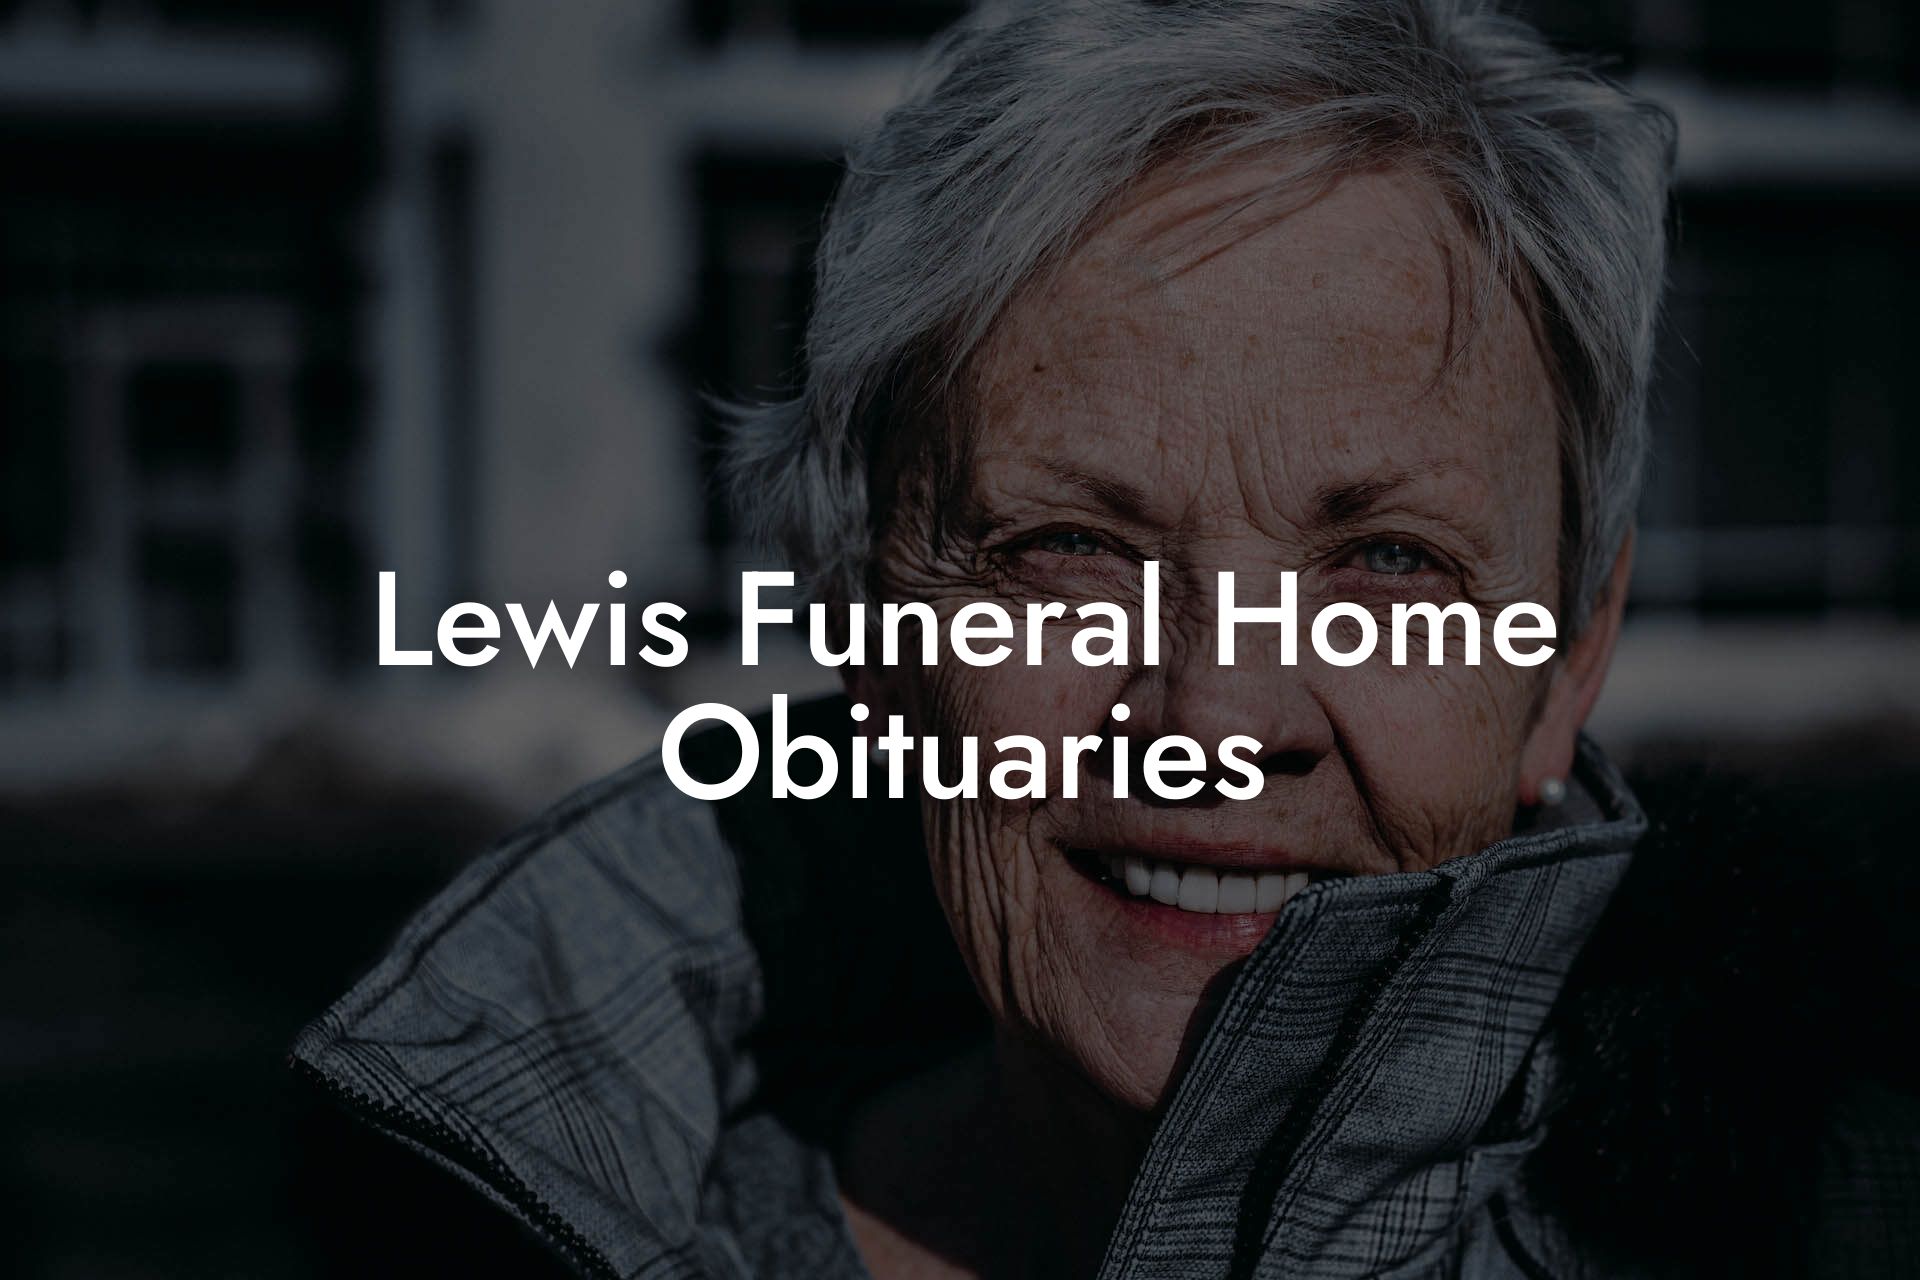 Lewis Funeral Home Obituaries